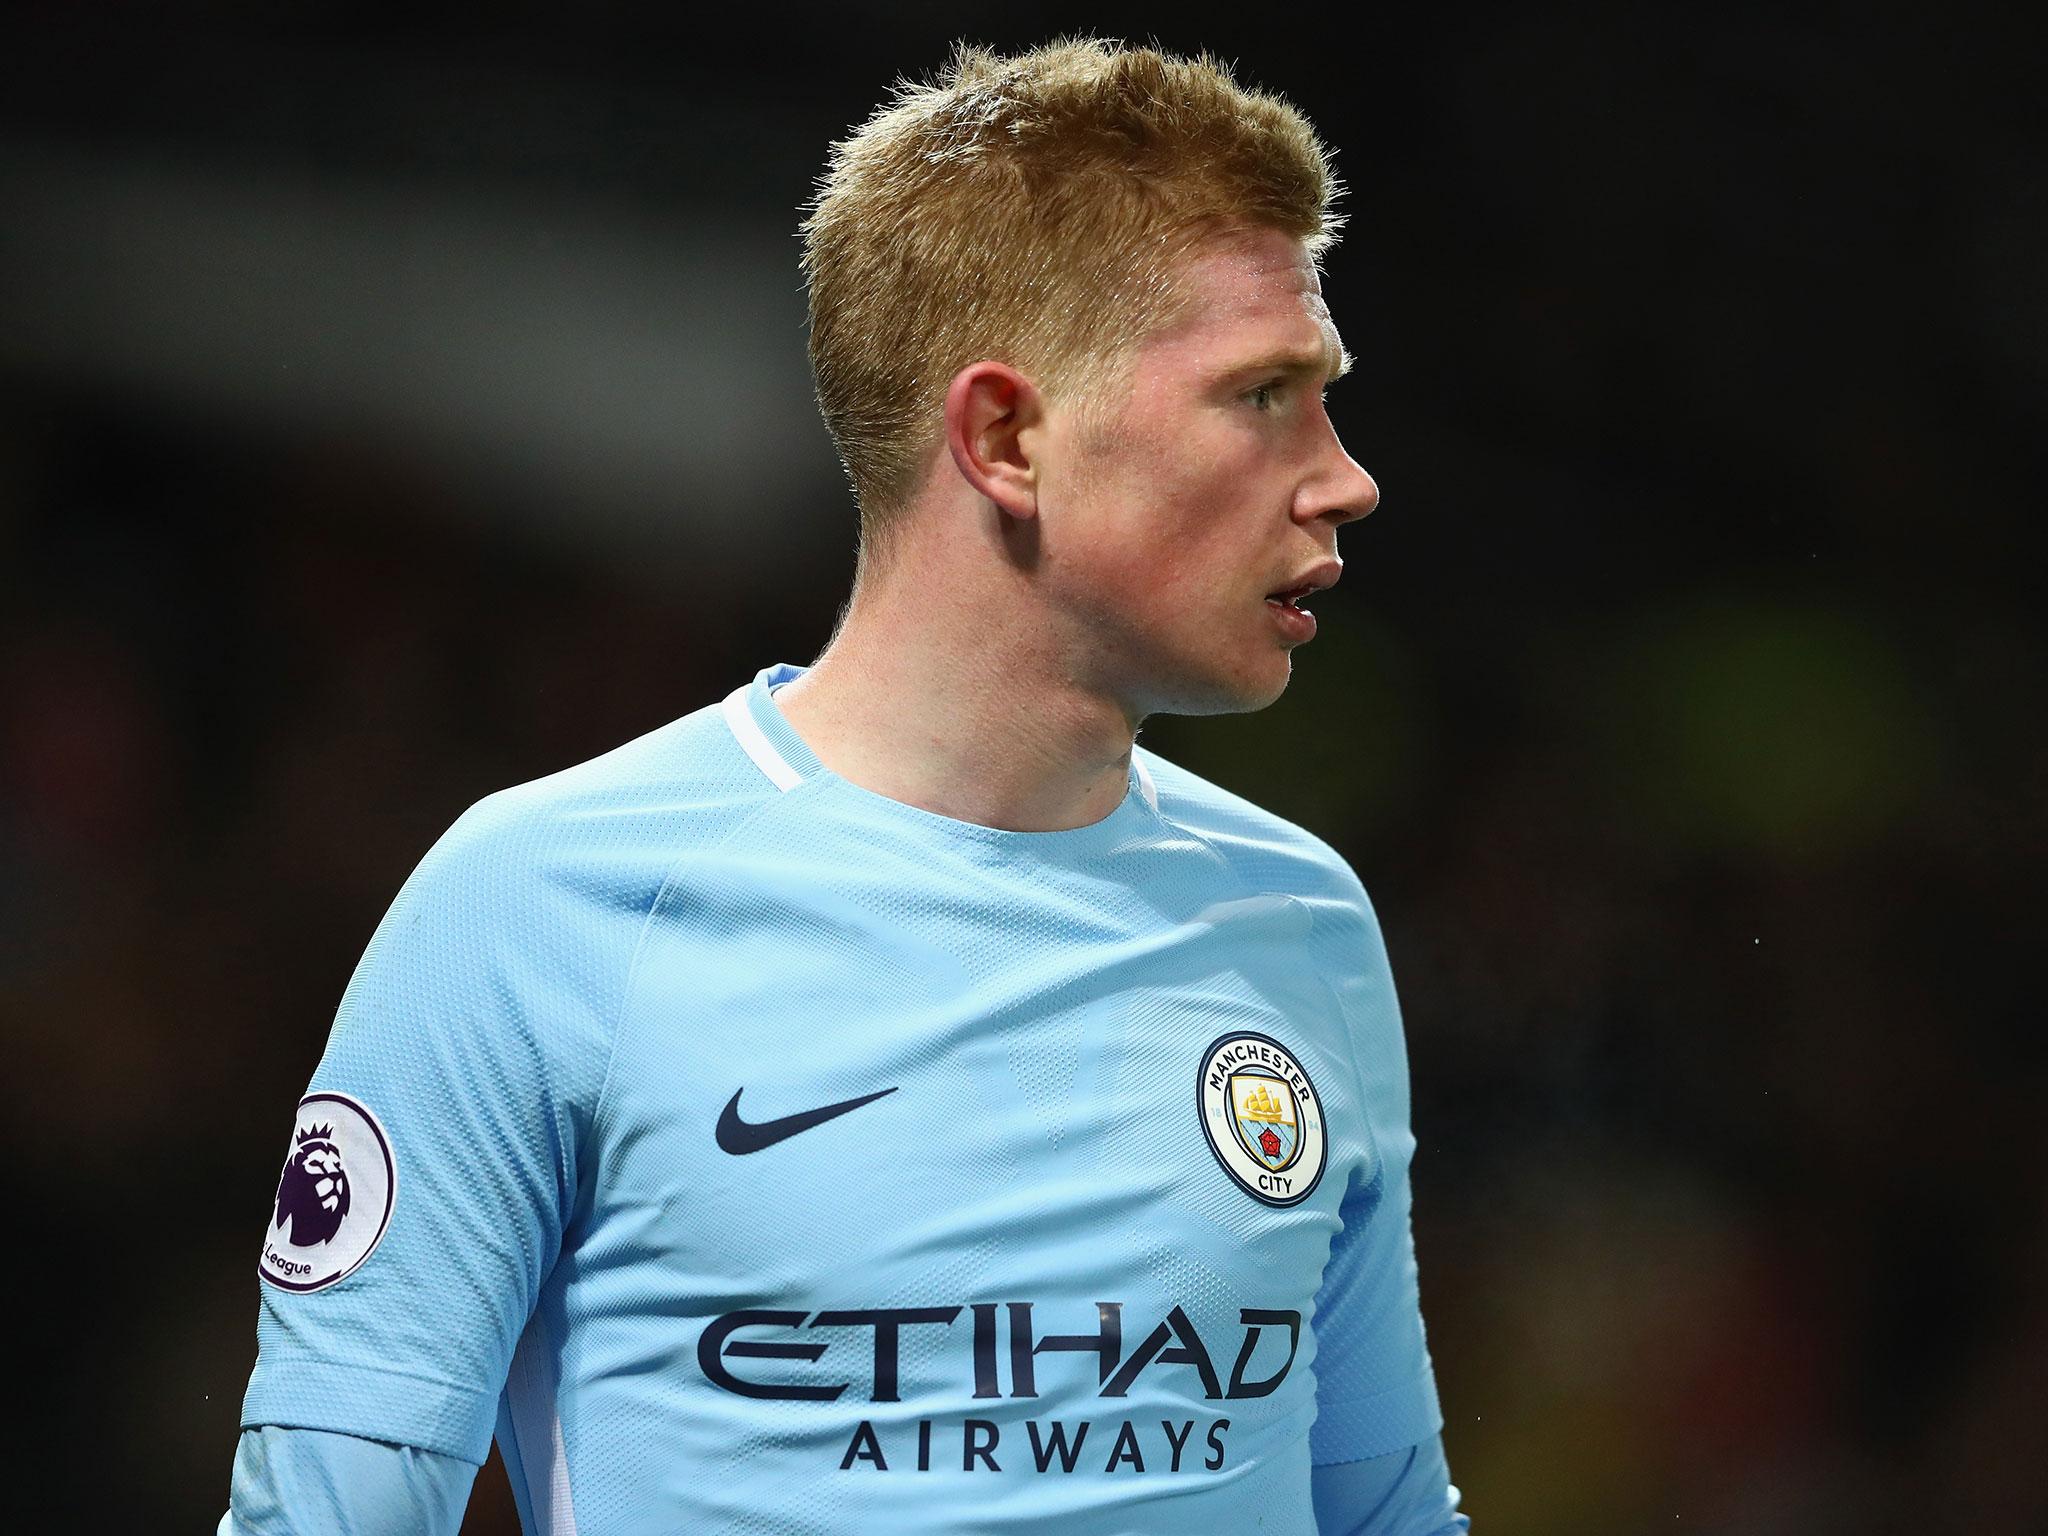 De Bruyne is expected to more or less double his current wages and earn around £200,000